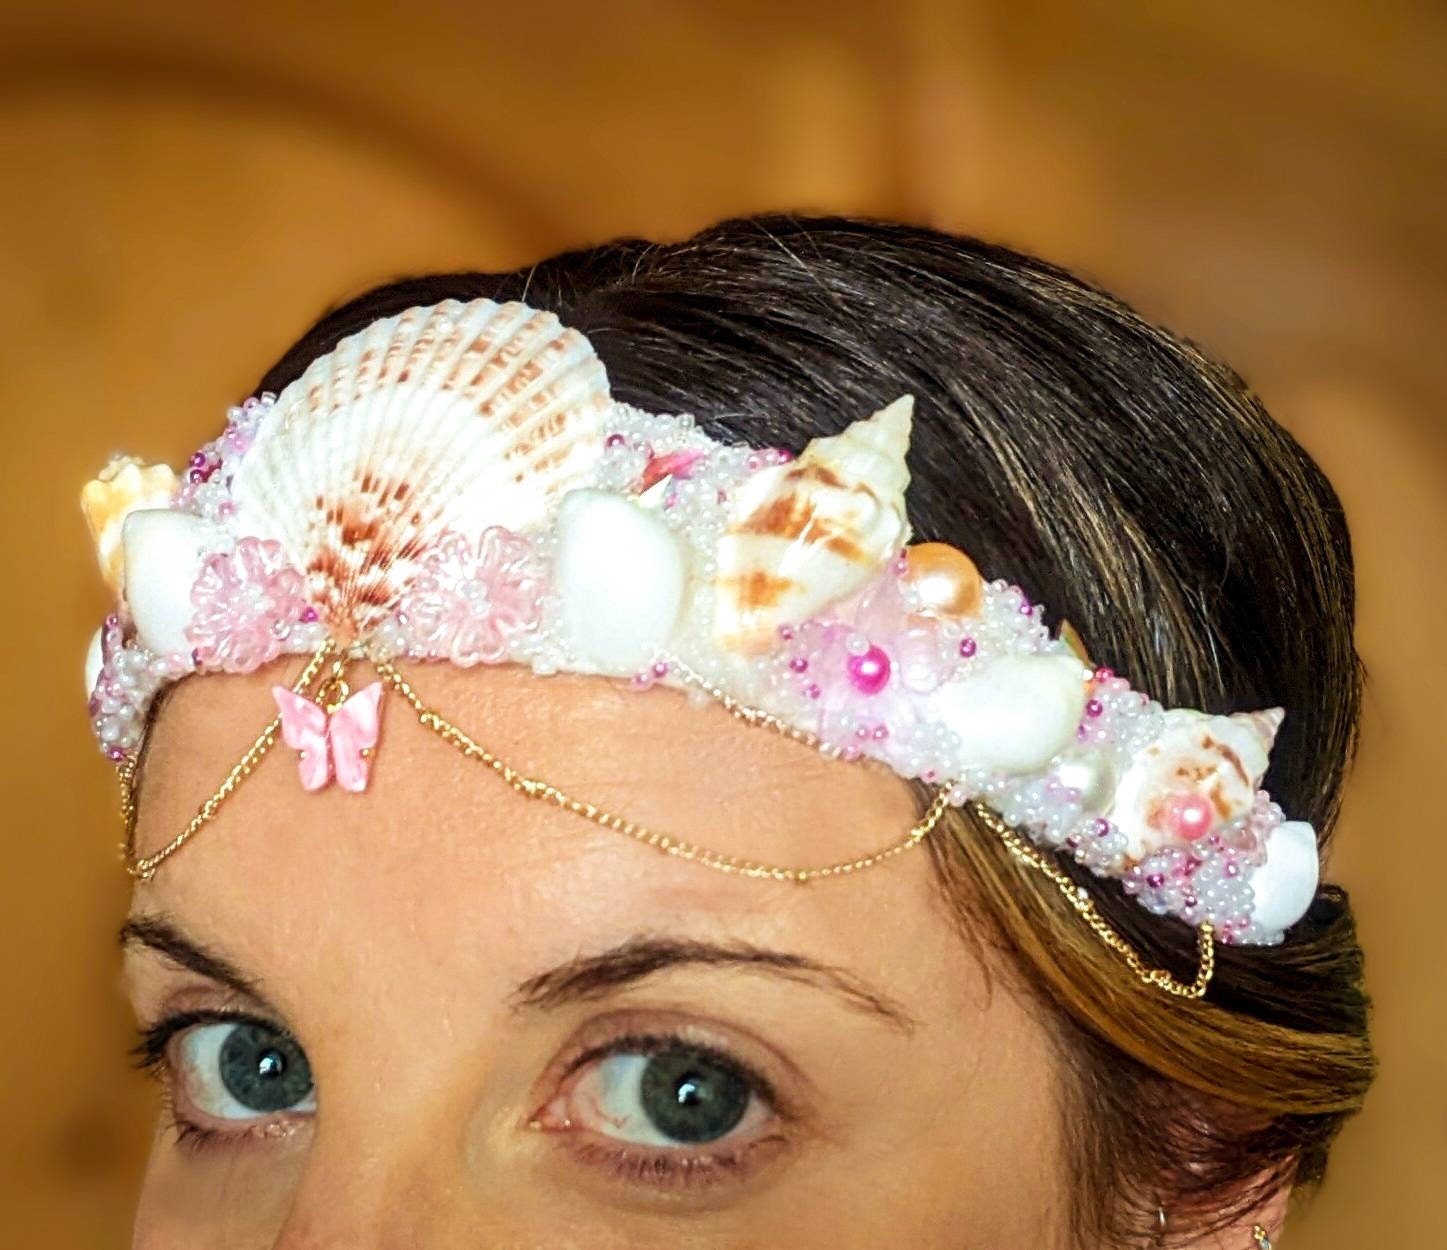 Pink White Cream Kids Childs Mermaid Crown Hair Band Headband Sea Shell Crystal Dangling Diamond Also In Adults UK Dress Up Cosplay Accessories Hair Accessories Headbands & Turbans 